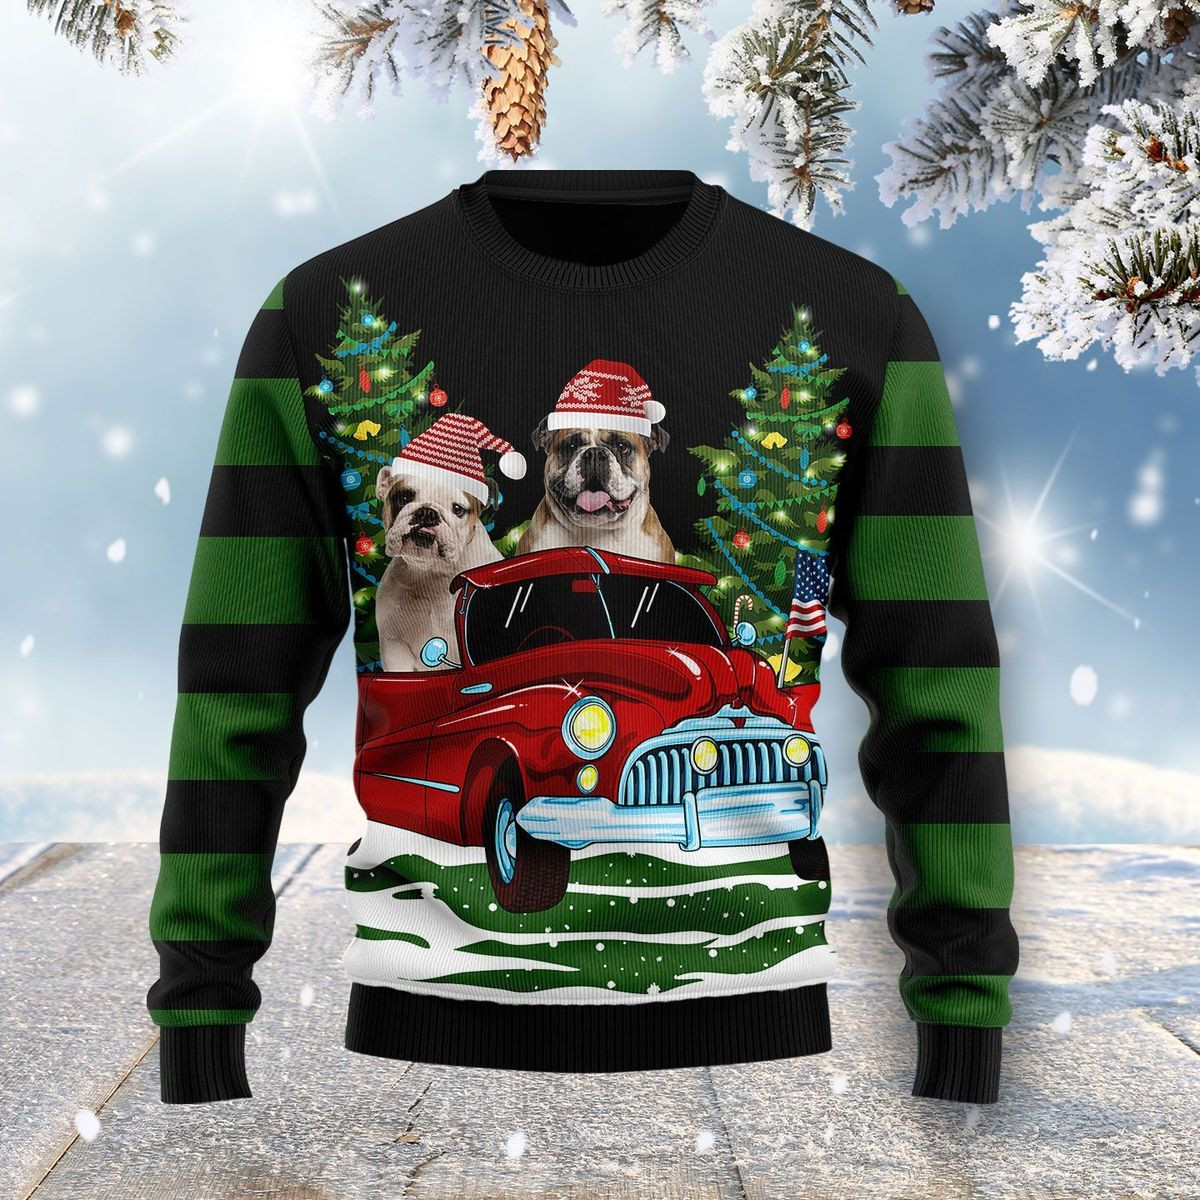 Merry Christmas Pug Dog Ugly Christmas Sweater Ugly Sweater For Men Women, Holiday Sweater